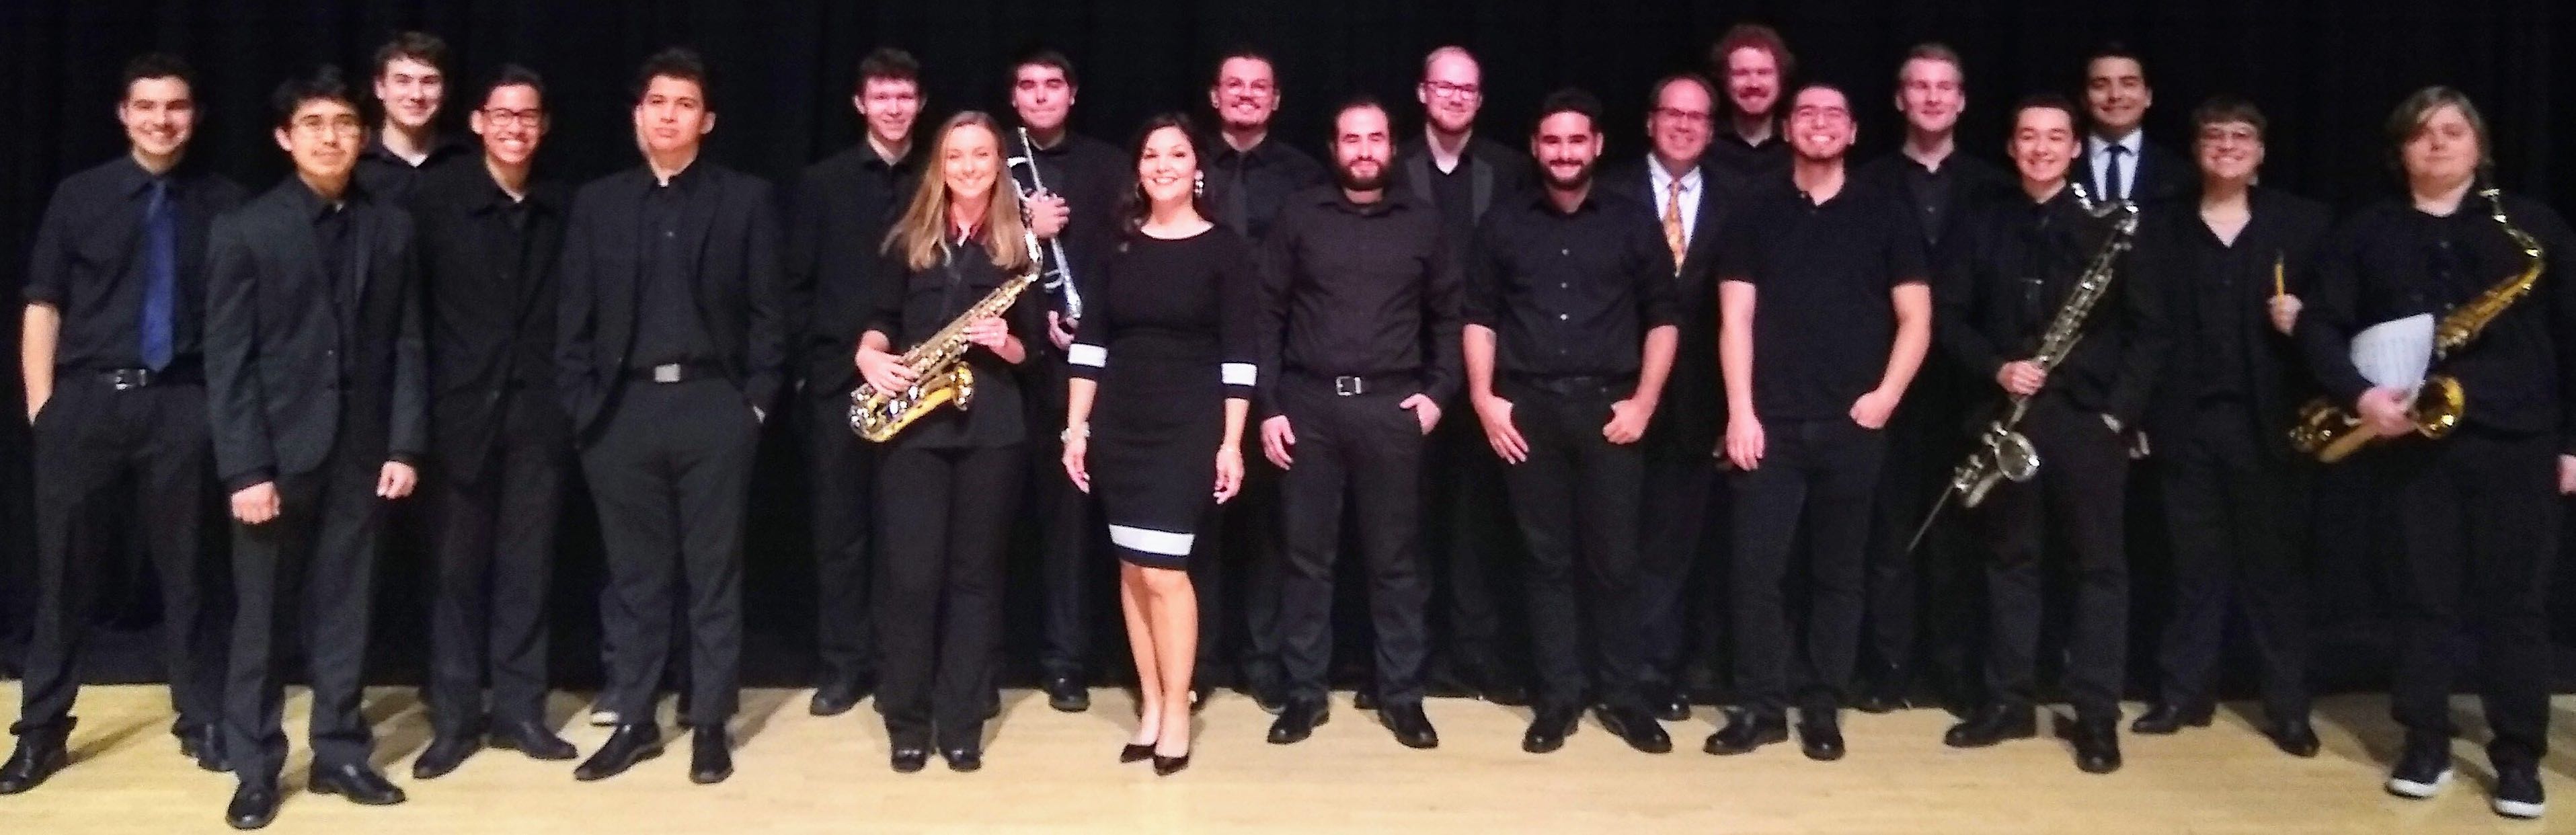 Jazz Band standing in a group and smiling